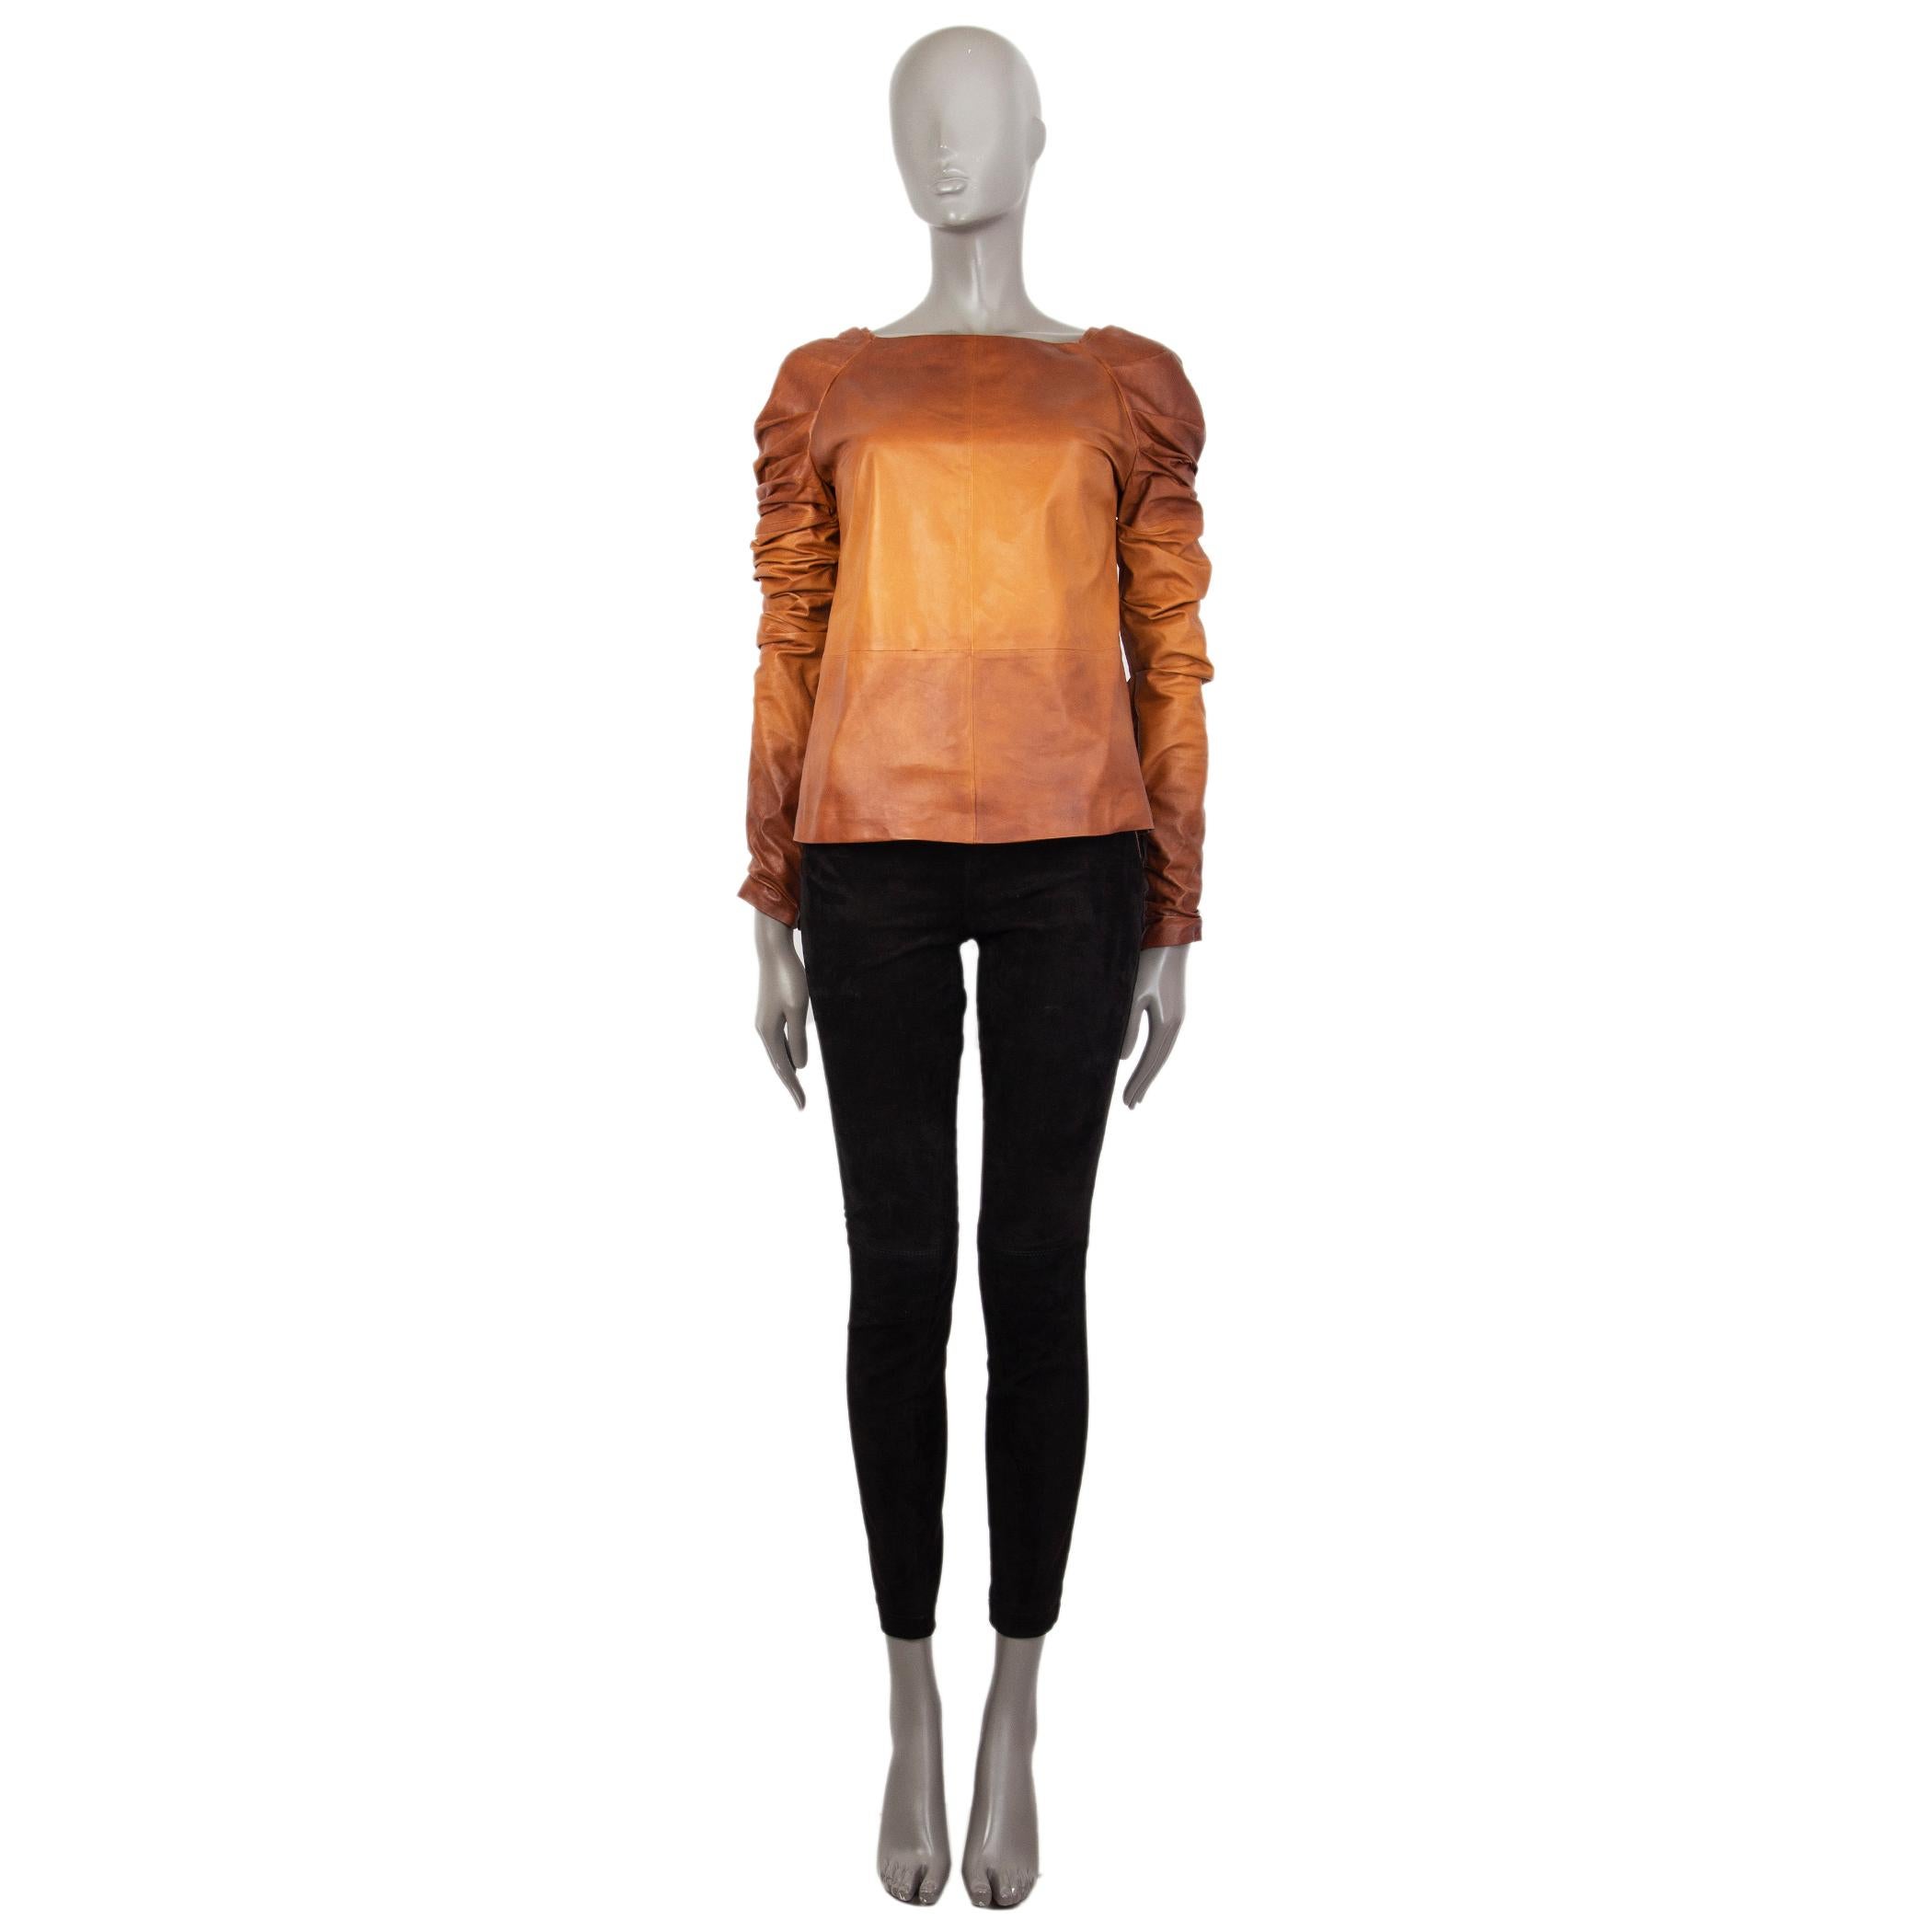 100% authentic Tom Ford draped long sleeve blouse in cognac ombre leather with a square neck. Closes on the back with a concealed zipper. Lined in silk (100%). Has been worn and is in excellent condition. 

Measurements
Tag Size	38
Size	XS
Shoulder